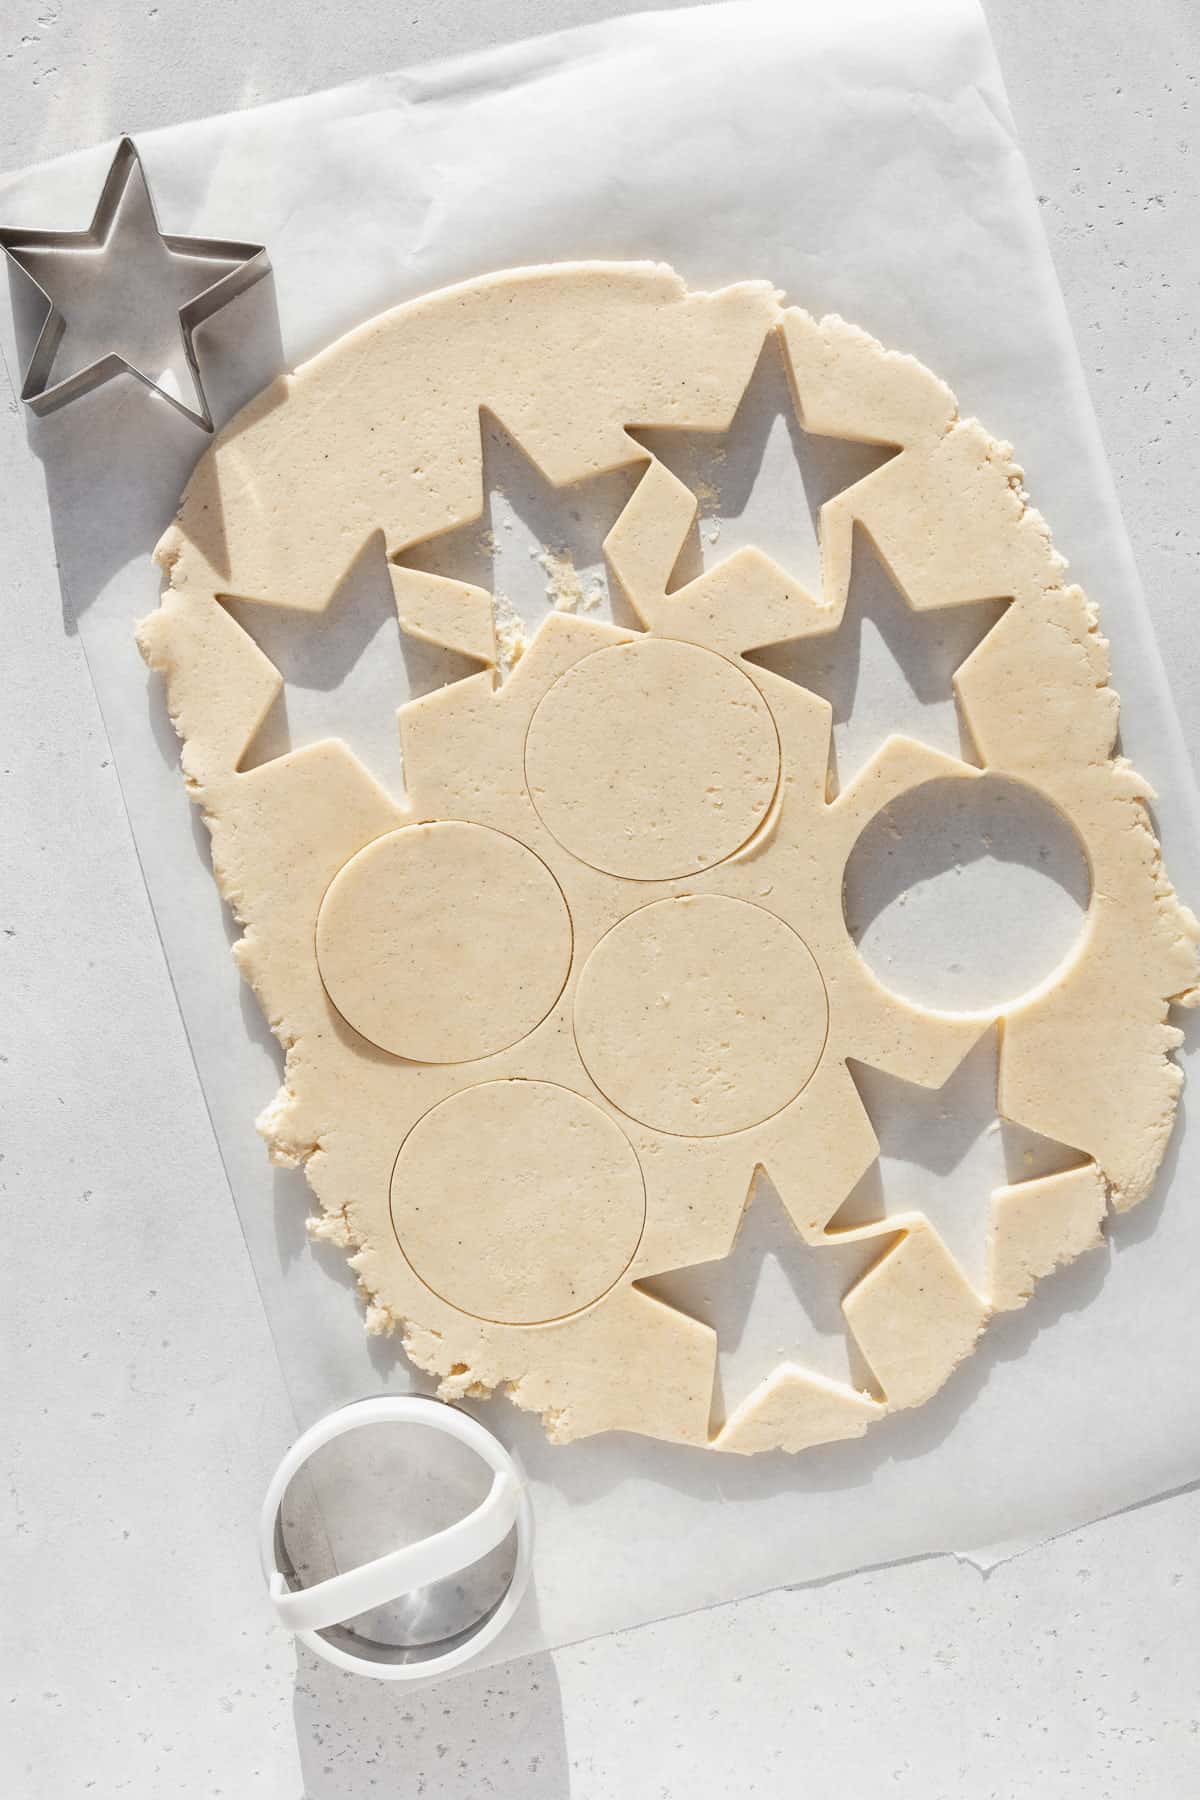 Shapes being cut out of rolled out sugar cookie dough.